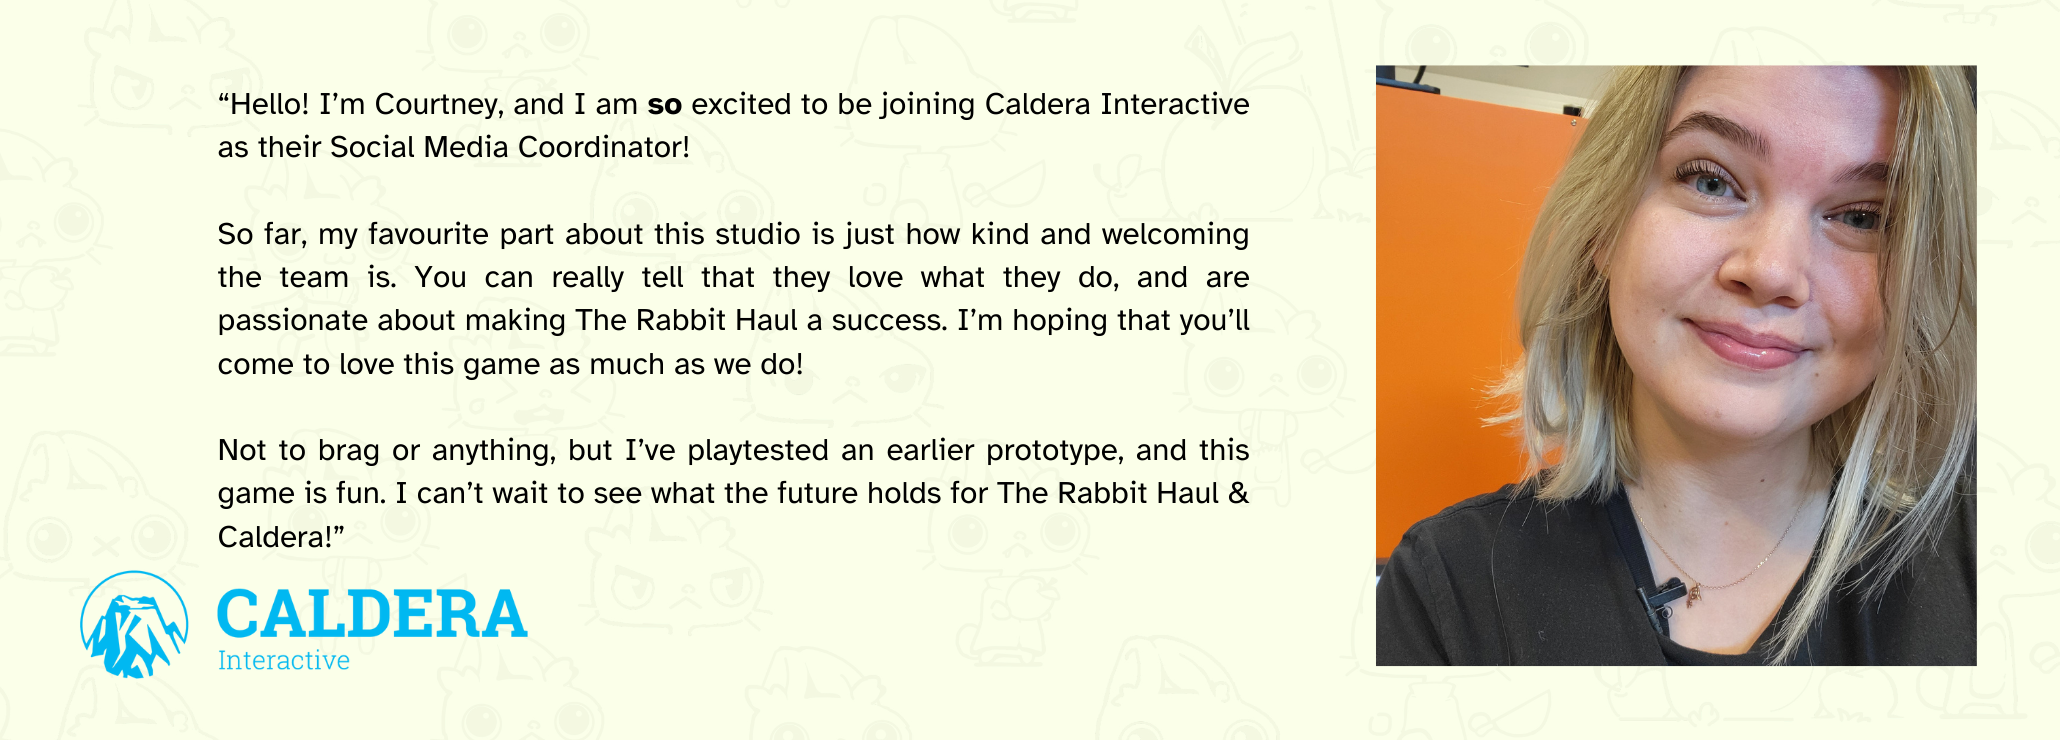 image of Courtney Nickerson with the following text beside her "Hello! I’m Courtney, and I am so excited to be joining Caldera Interactive as their Social Media Coordinator!  So far, my favourite part about this studio is just how kind and welcoming the team is. You can really tell that they love what they do, and are passionate about making The Rabbit Haul a success. I’m hoping that you’ll come to love this game as much as we do!  Not to brag or anything, but I’ve playtested an earlier prototype, and this game is fun. I can’t wait to see what the future holds for The Rabbit Haul & Caldera!"